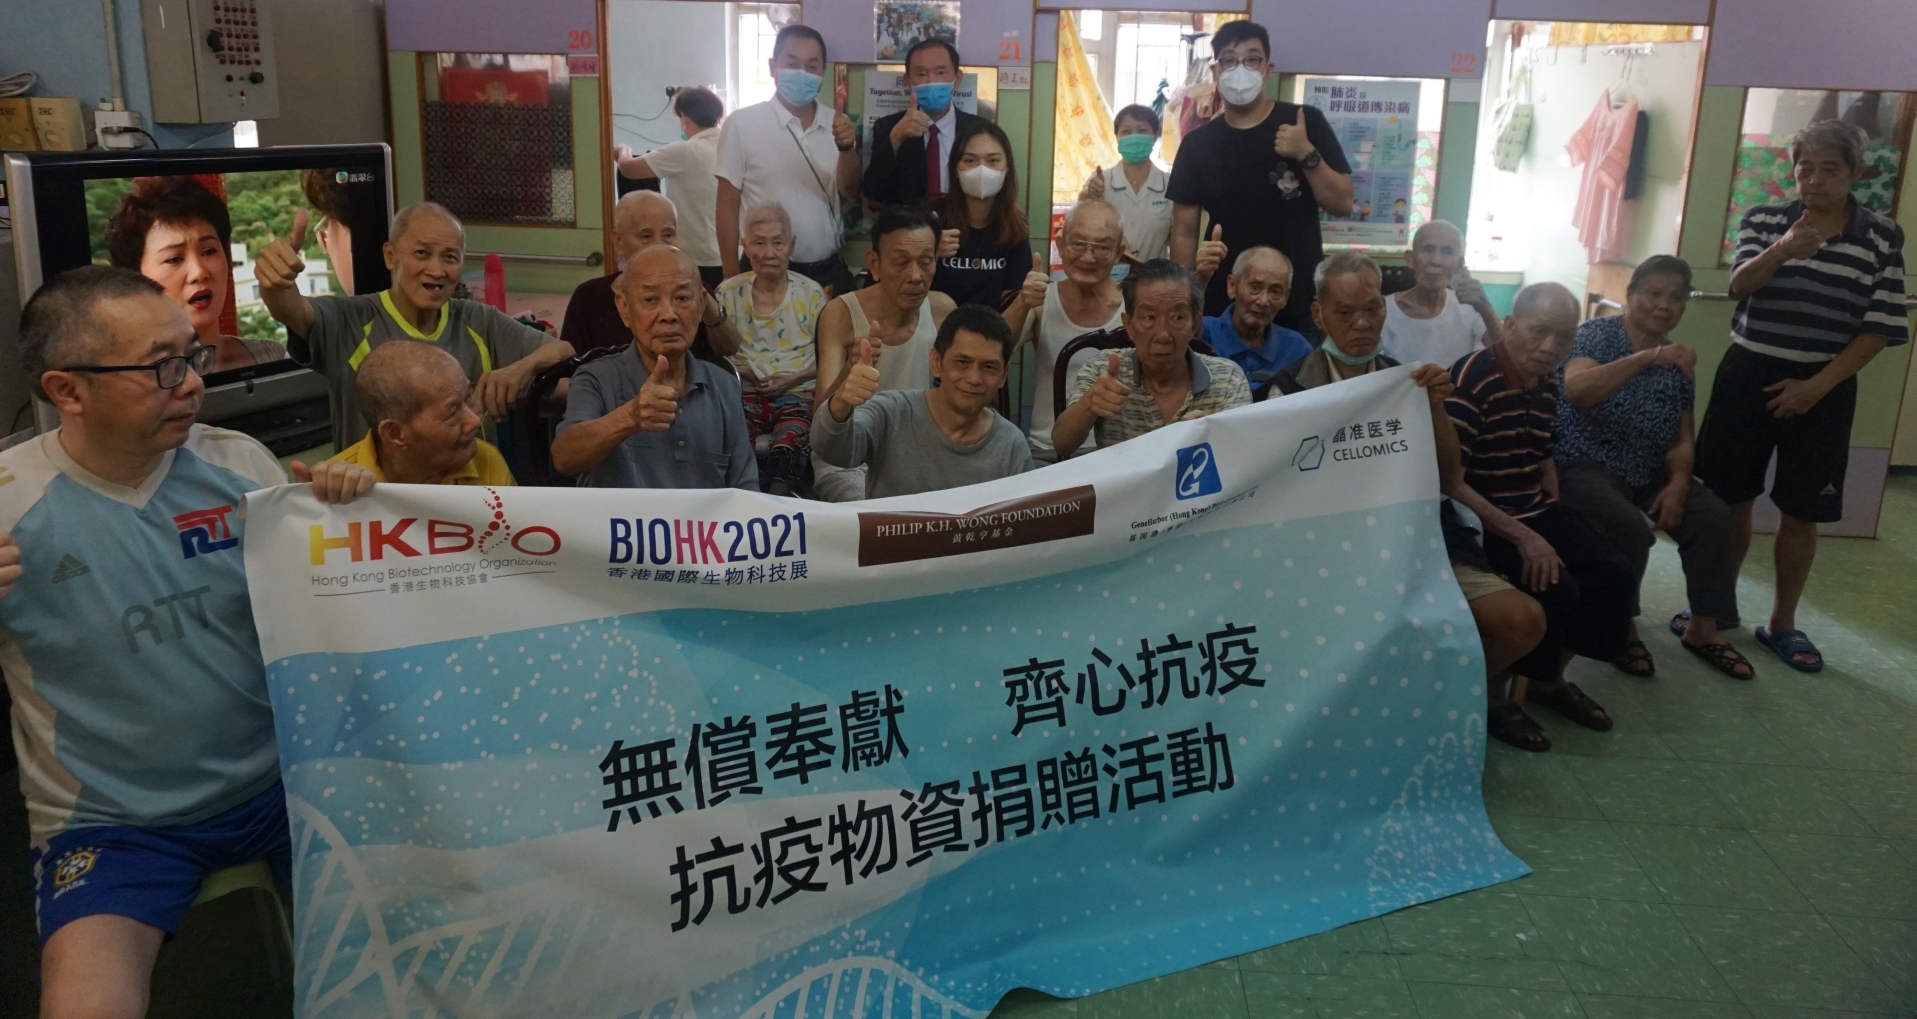 Hong Kong Biotechnology Organization supporting vulnerable groups in their fight against the virus 